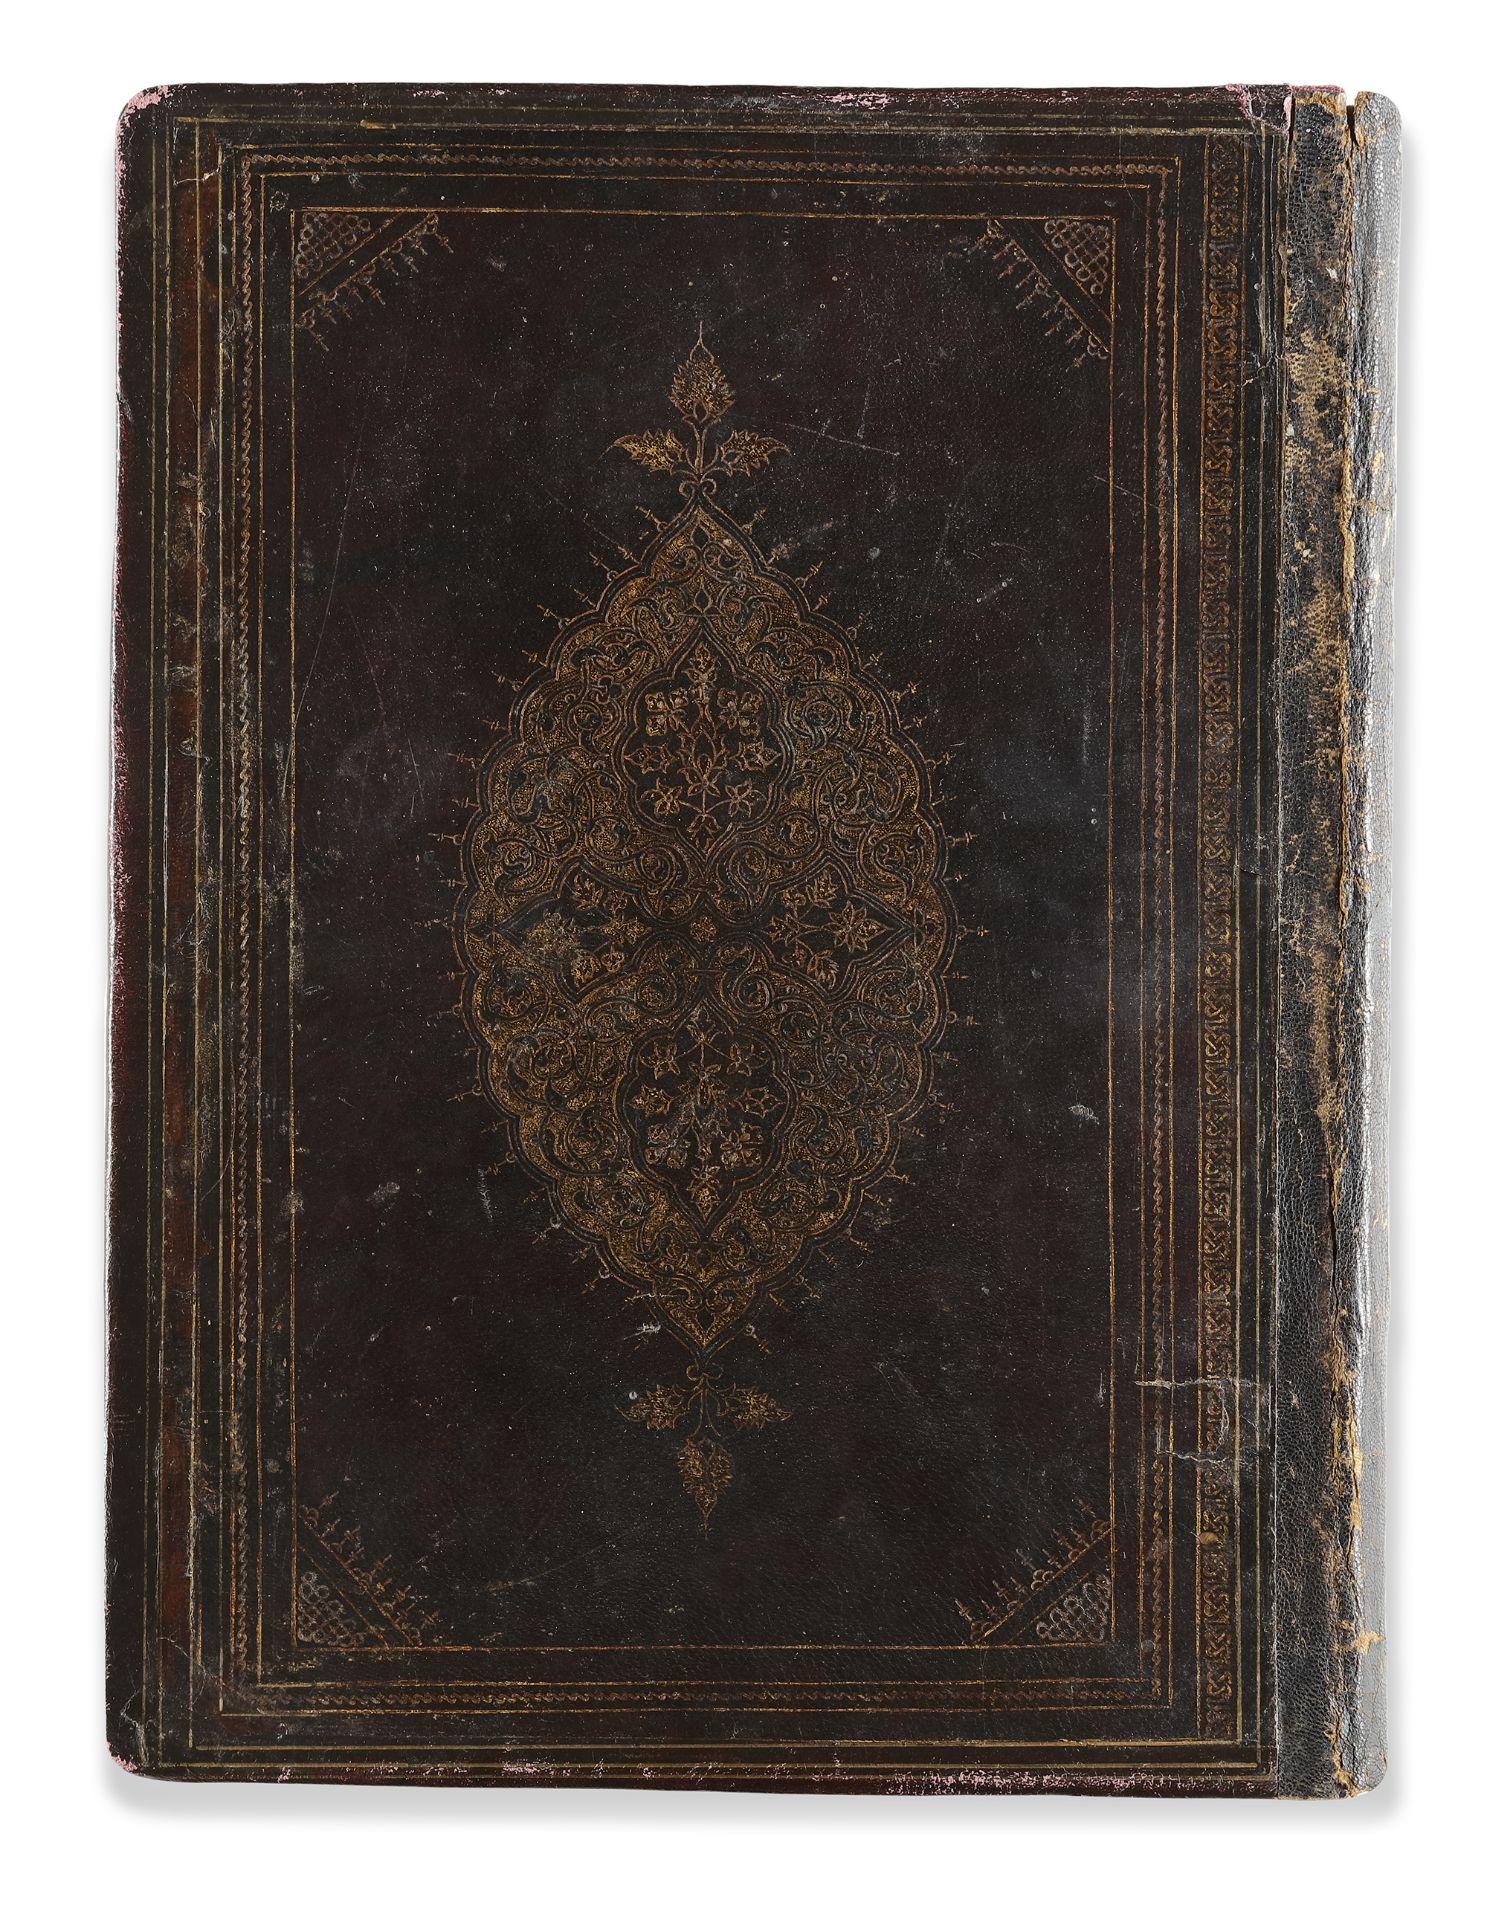 A QURAN ILKHANID AND MUGHAL INDIA, 14TH-17TH CENTURY - Image 2 of 6